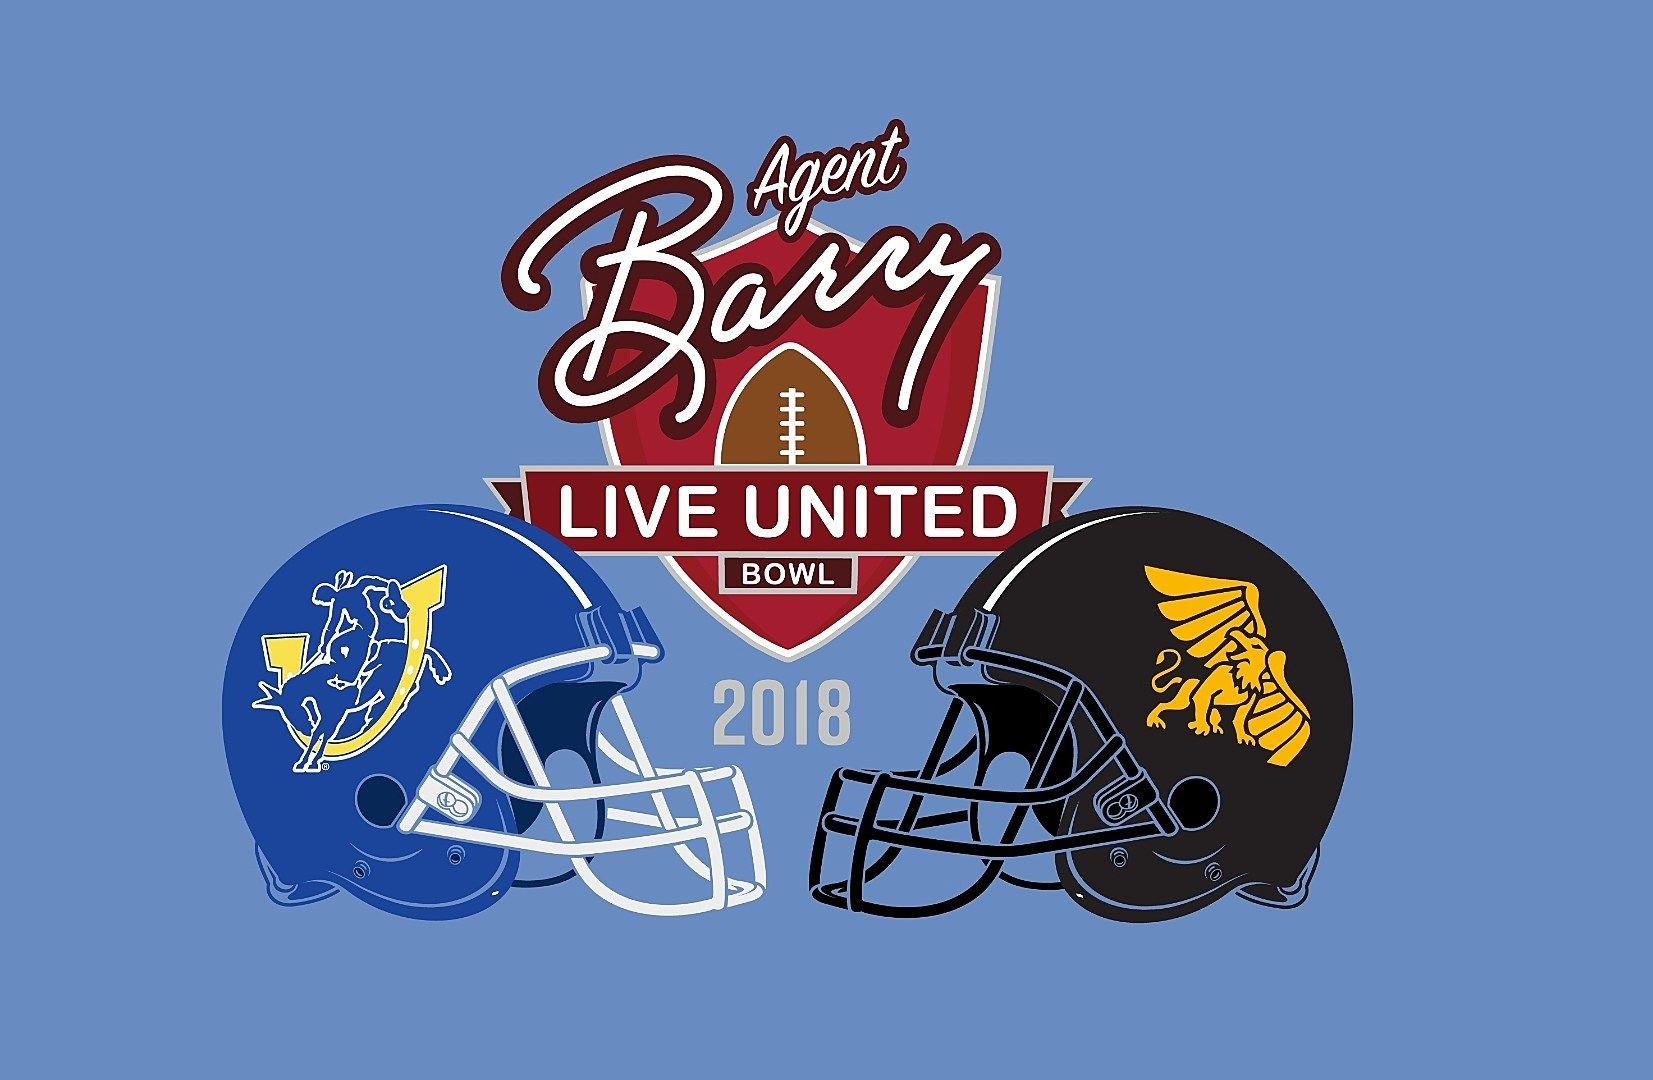 United Bowl Logo - Agent Barry 'Live United Bowl' 2018 - Schedule For The Week